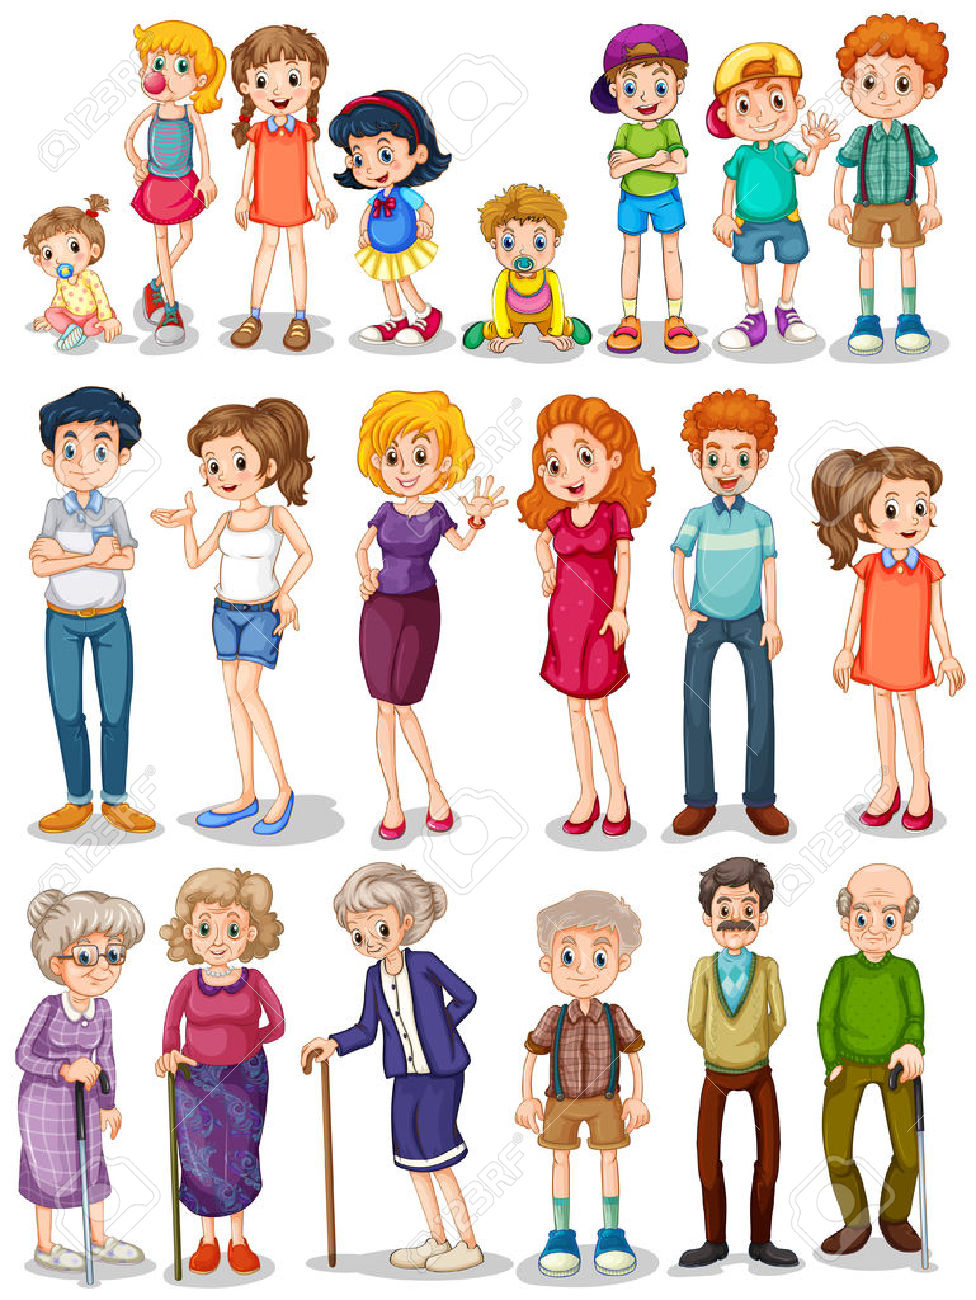 Tante clipart 6 » Clipart Station.